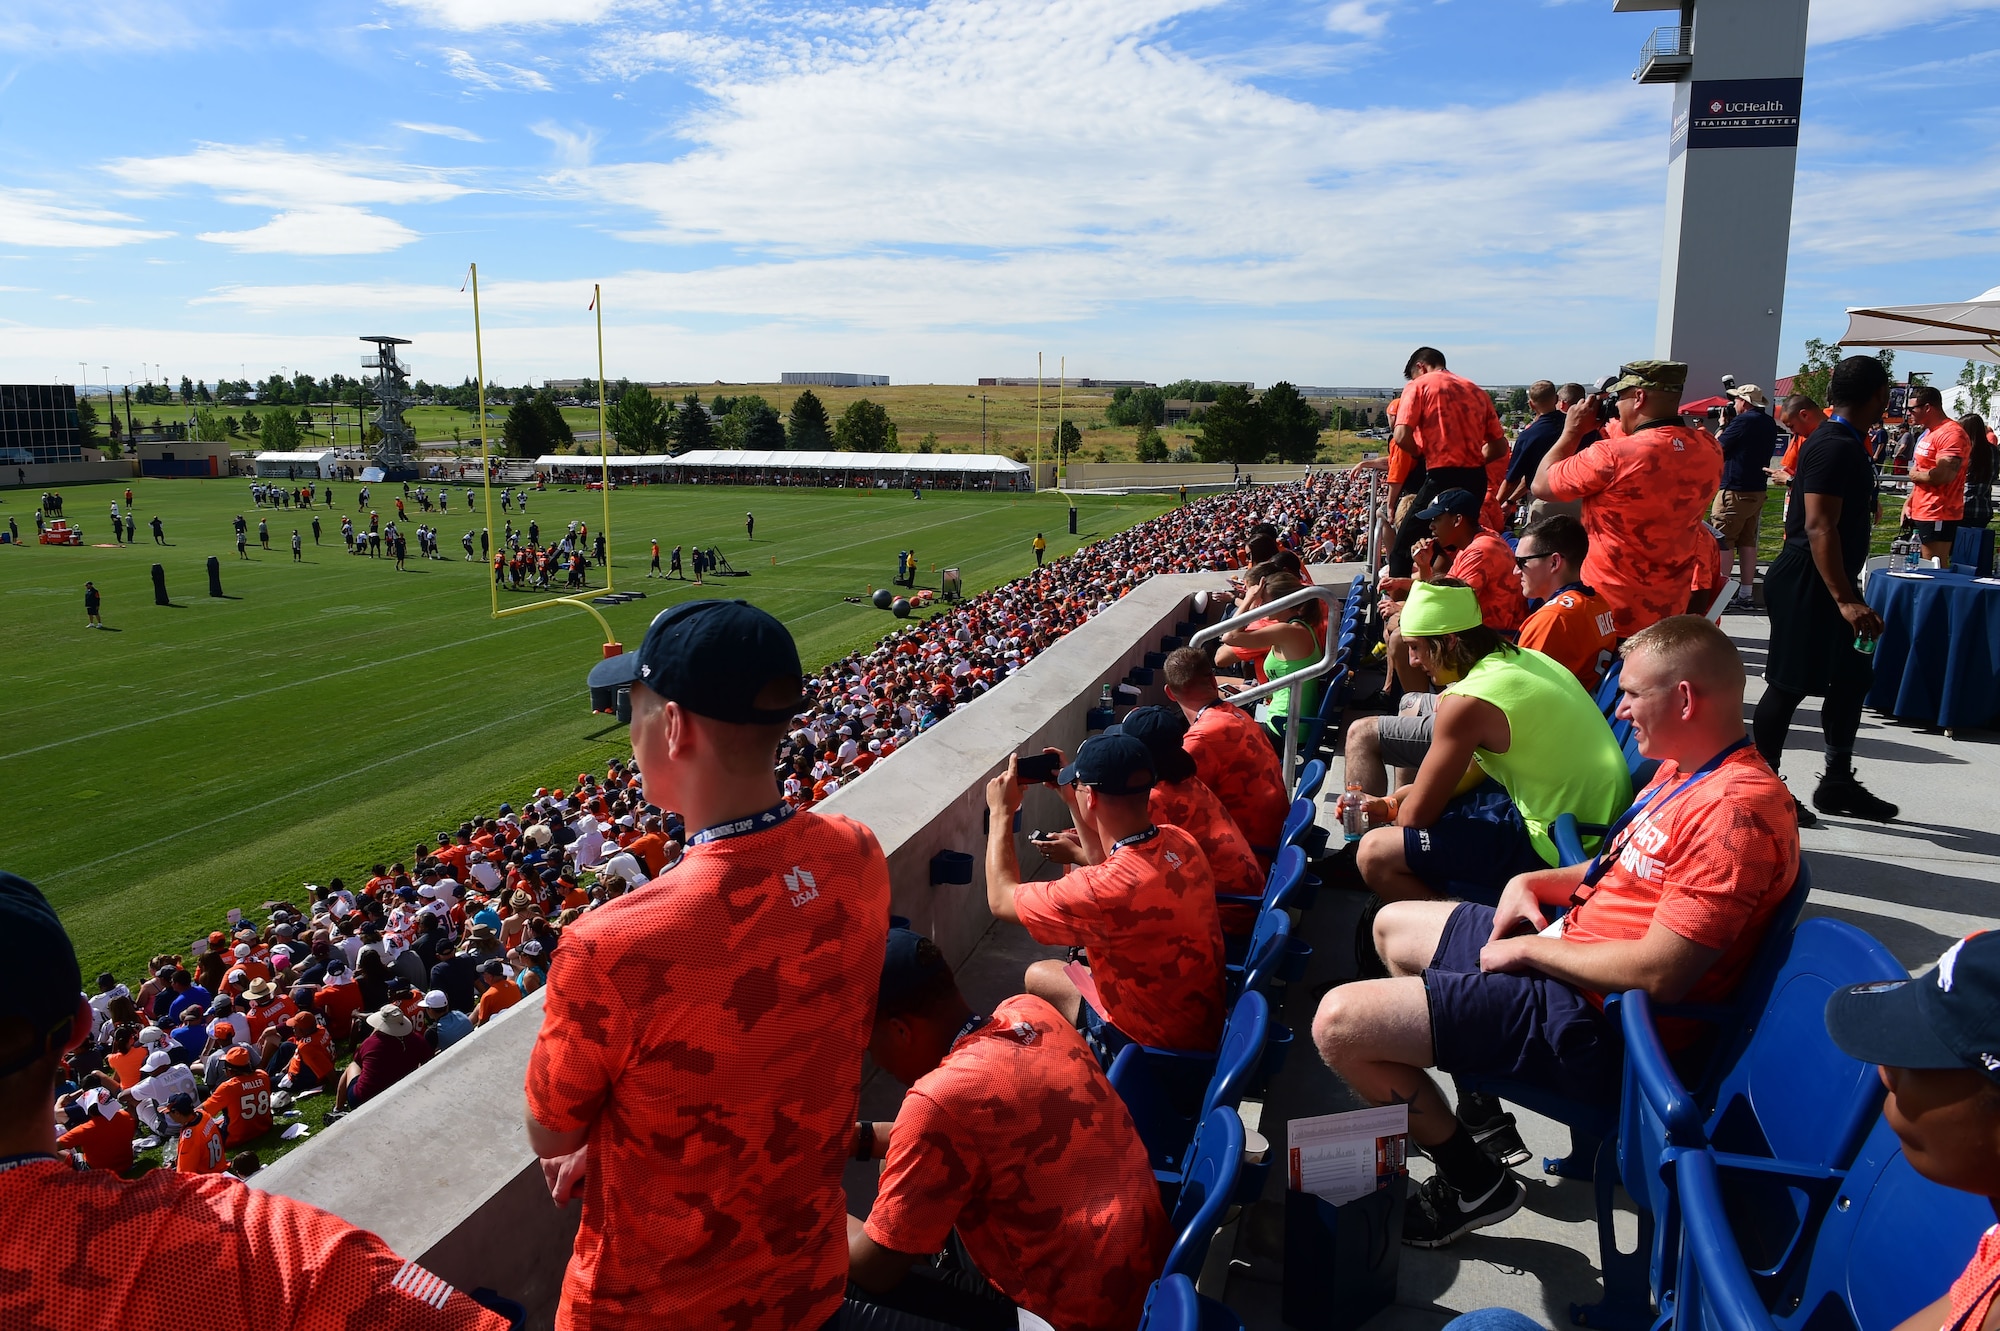 Military members watch the Denver Broncos training camp practice after participating in the military combine Aug. 7, 2015, at the Denver Broncos Headquarters Facility at Dove Valley in Denver.  The combine consisted of drills similar to the ones prospective National Football League players are expected to complete during the NFL combine held in Indianapolis before the NFL draft. All participants were also treated to a viewing of the Broncos’ Friday morning practice and a visit from Broncos’ players as well as the head coach. (U.S. Air Force photo by Airman 1st Class Luke W. Nowakowski/Released)